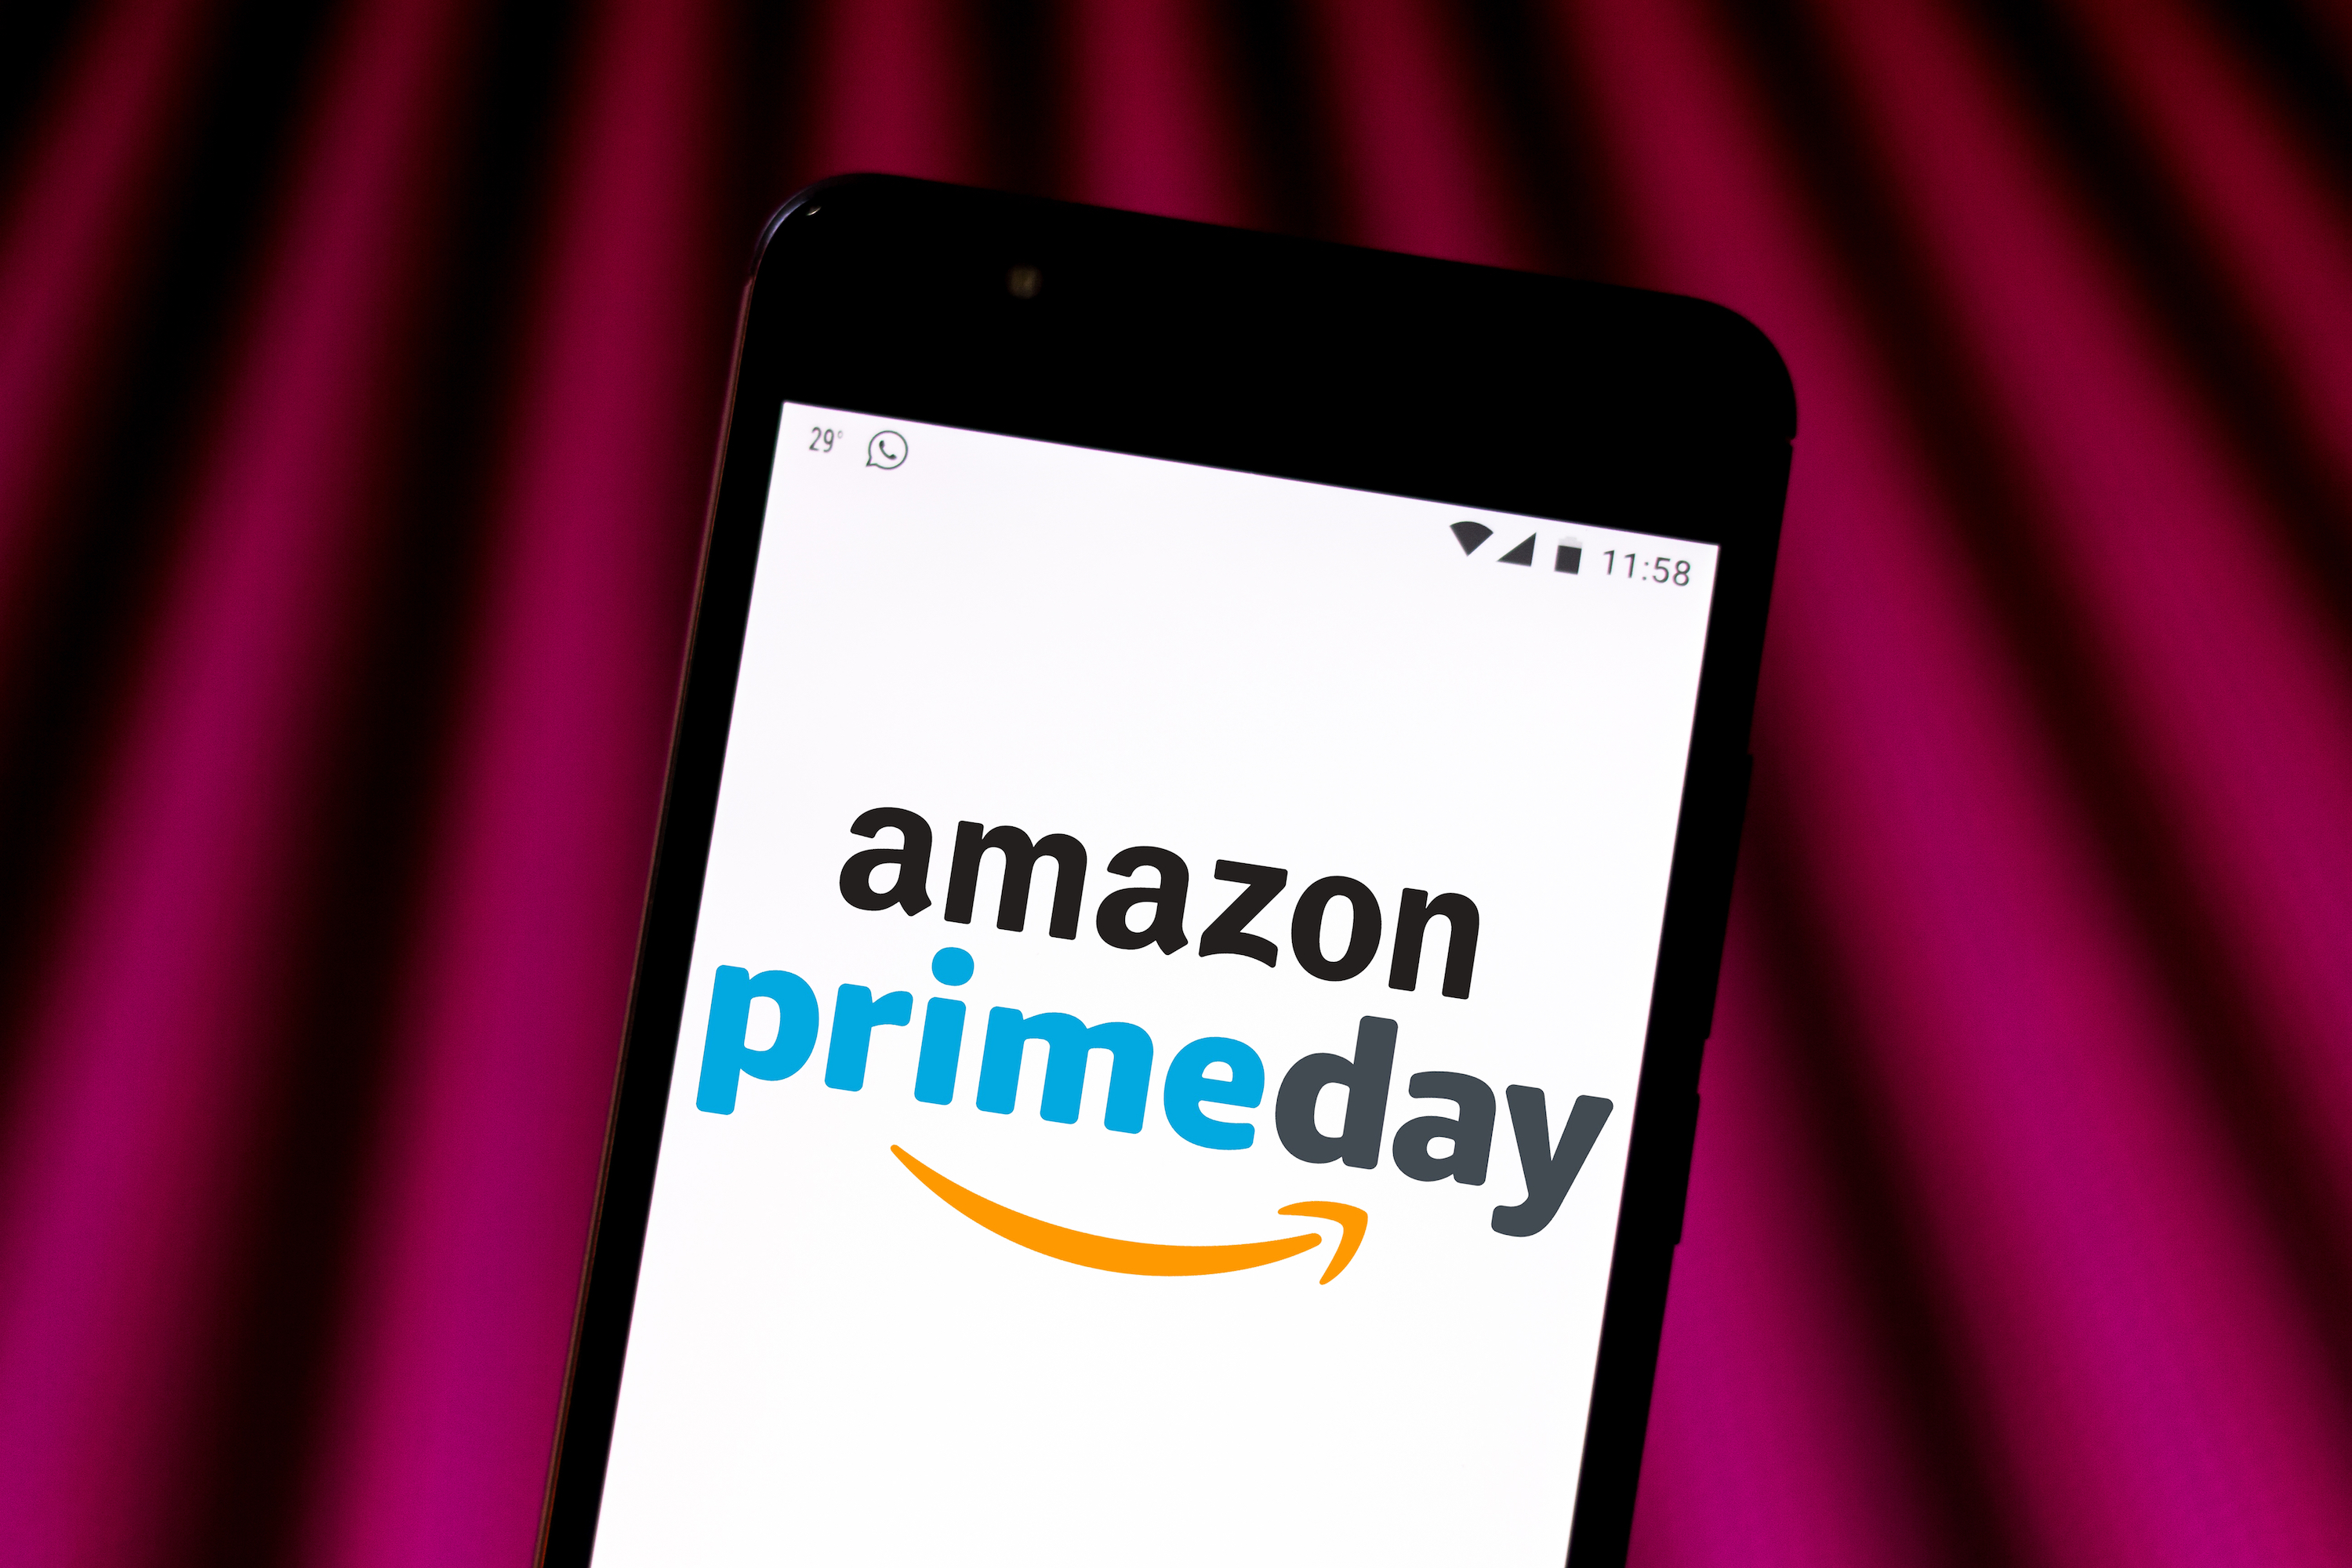 How to Watch Deals on Prime Day